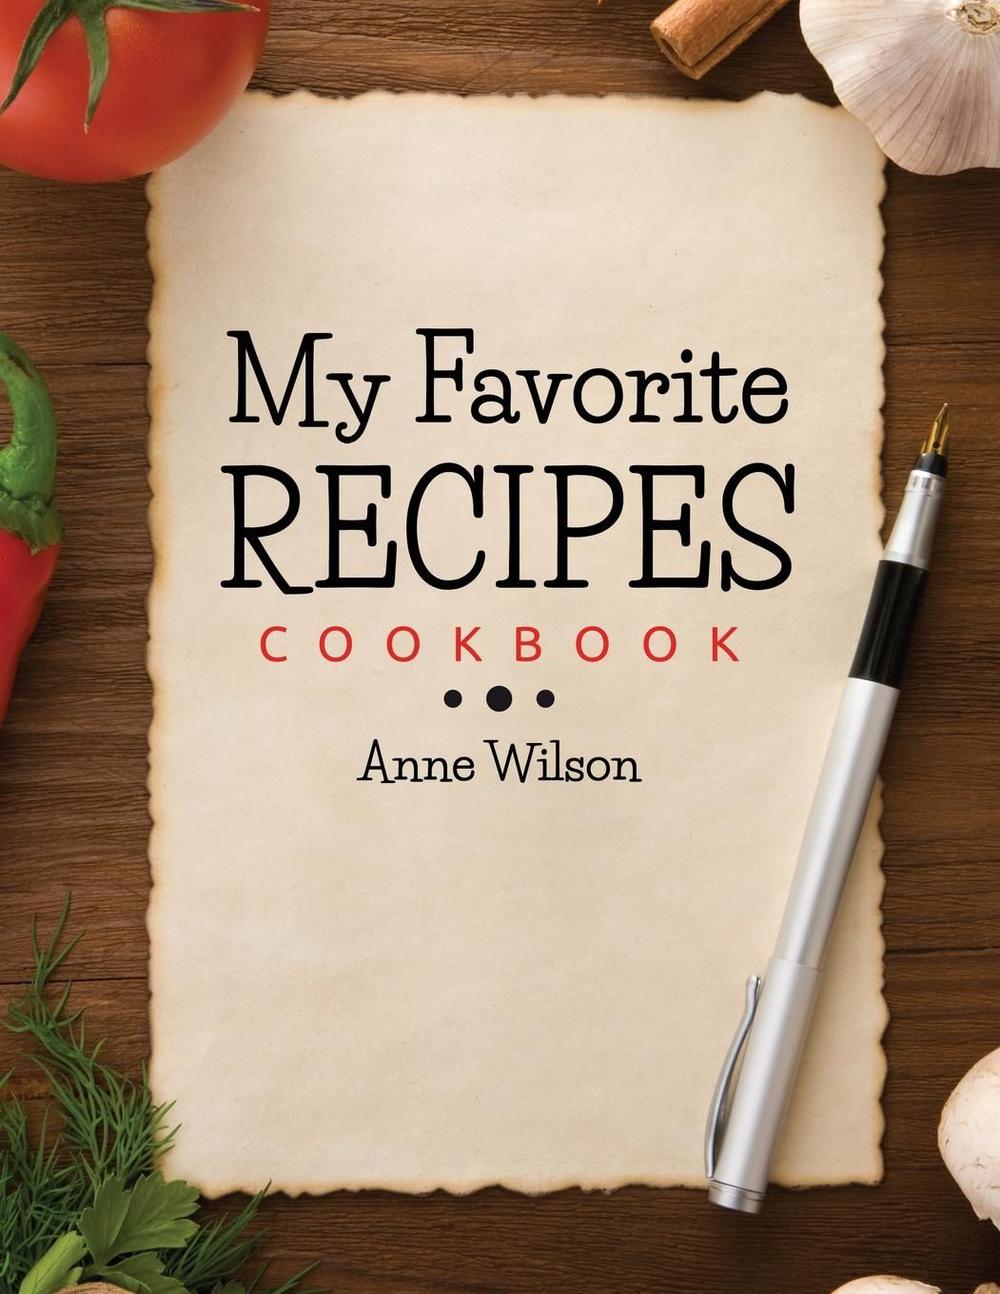 My Favorite Recipes: Cookbook by Anne Wilson (English) Paperback Book ...